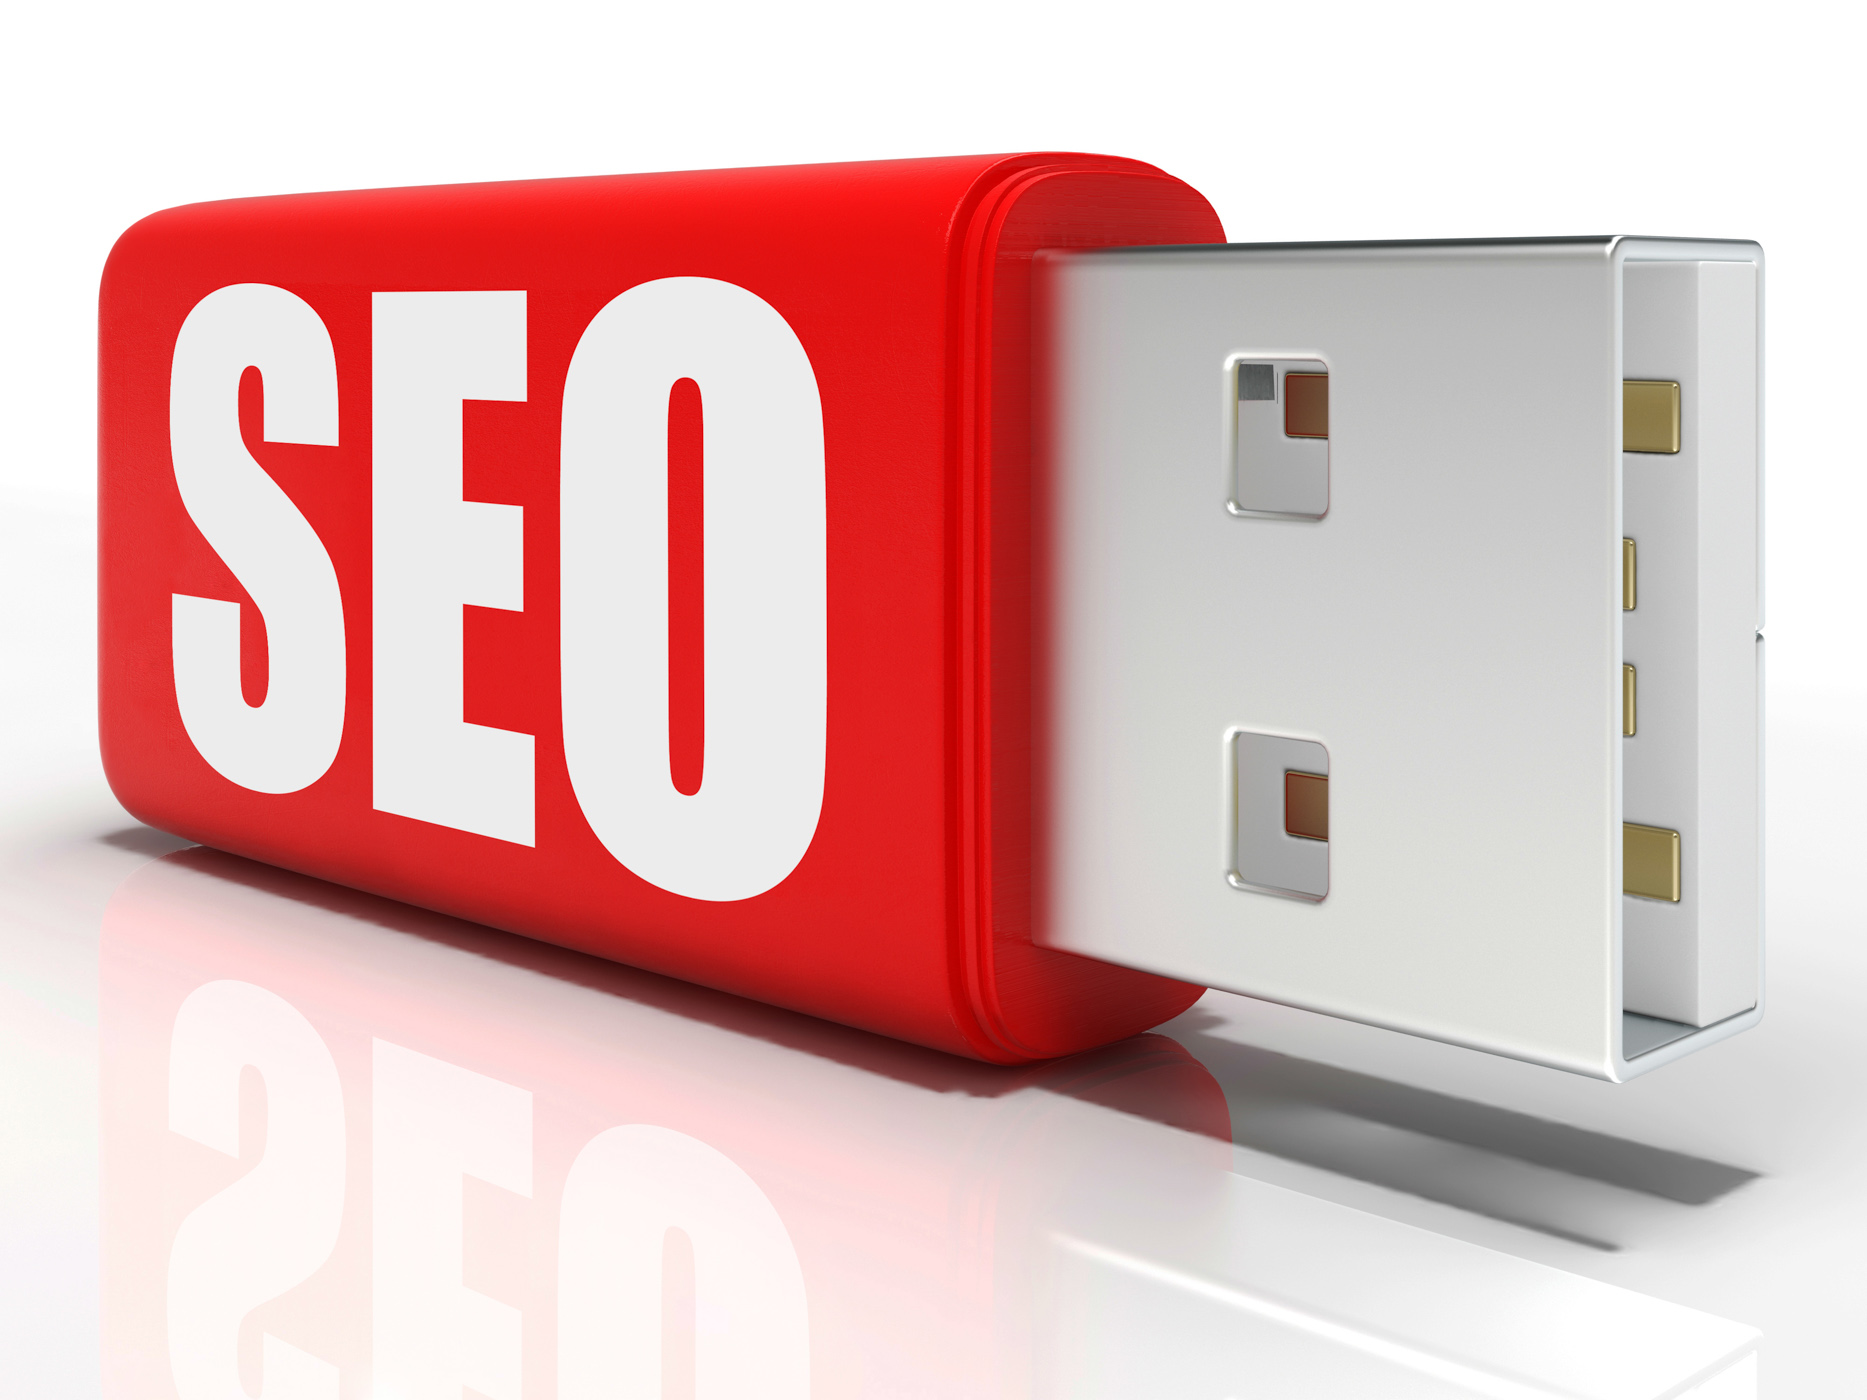 Seo pen drive shows search engine optimization or management photo